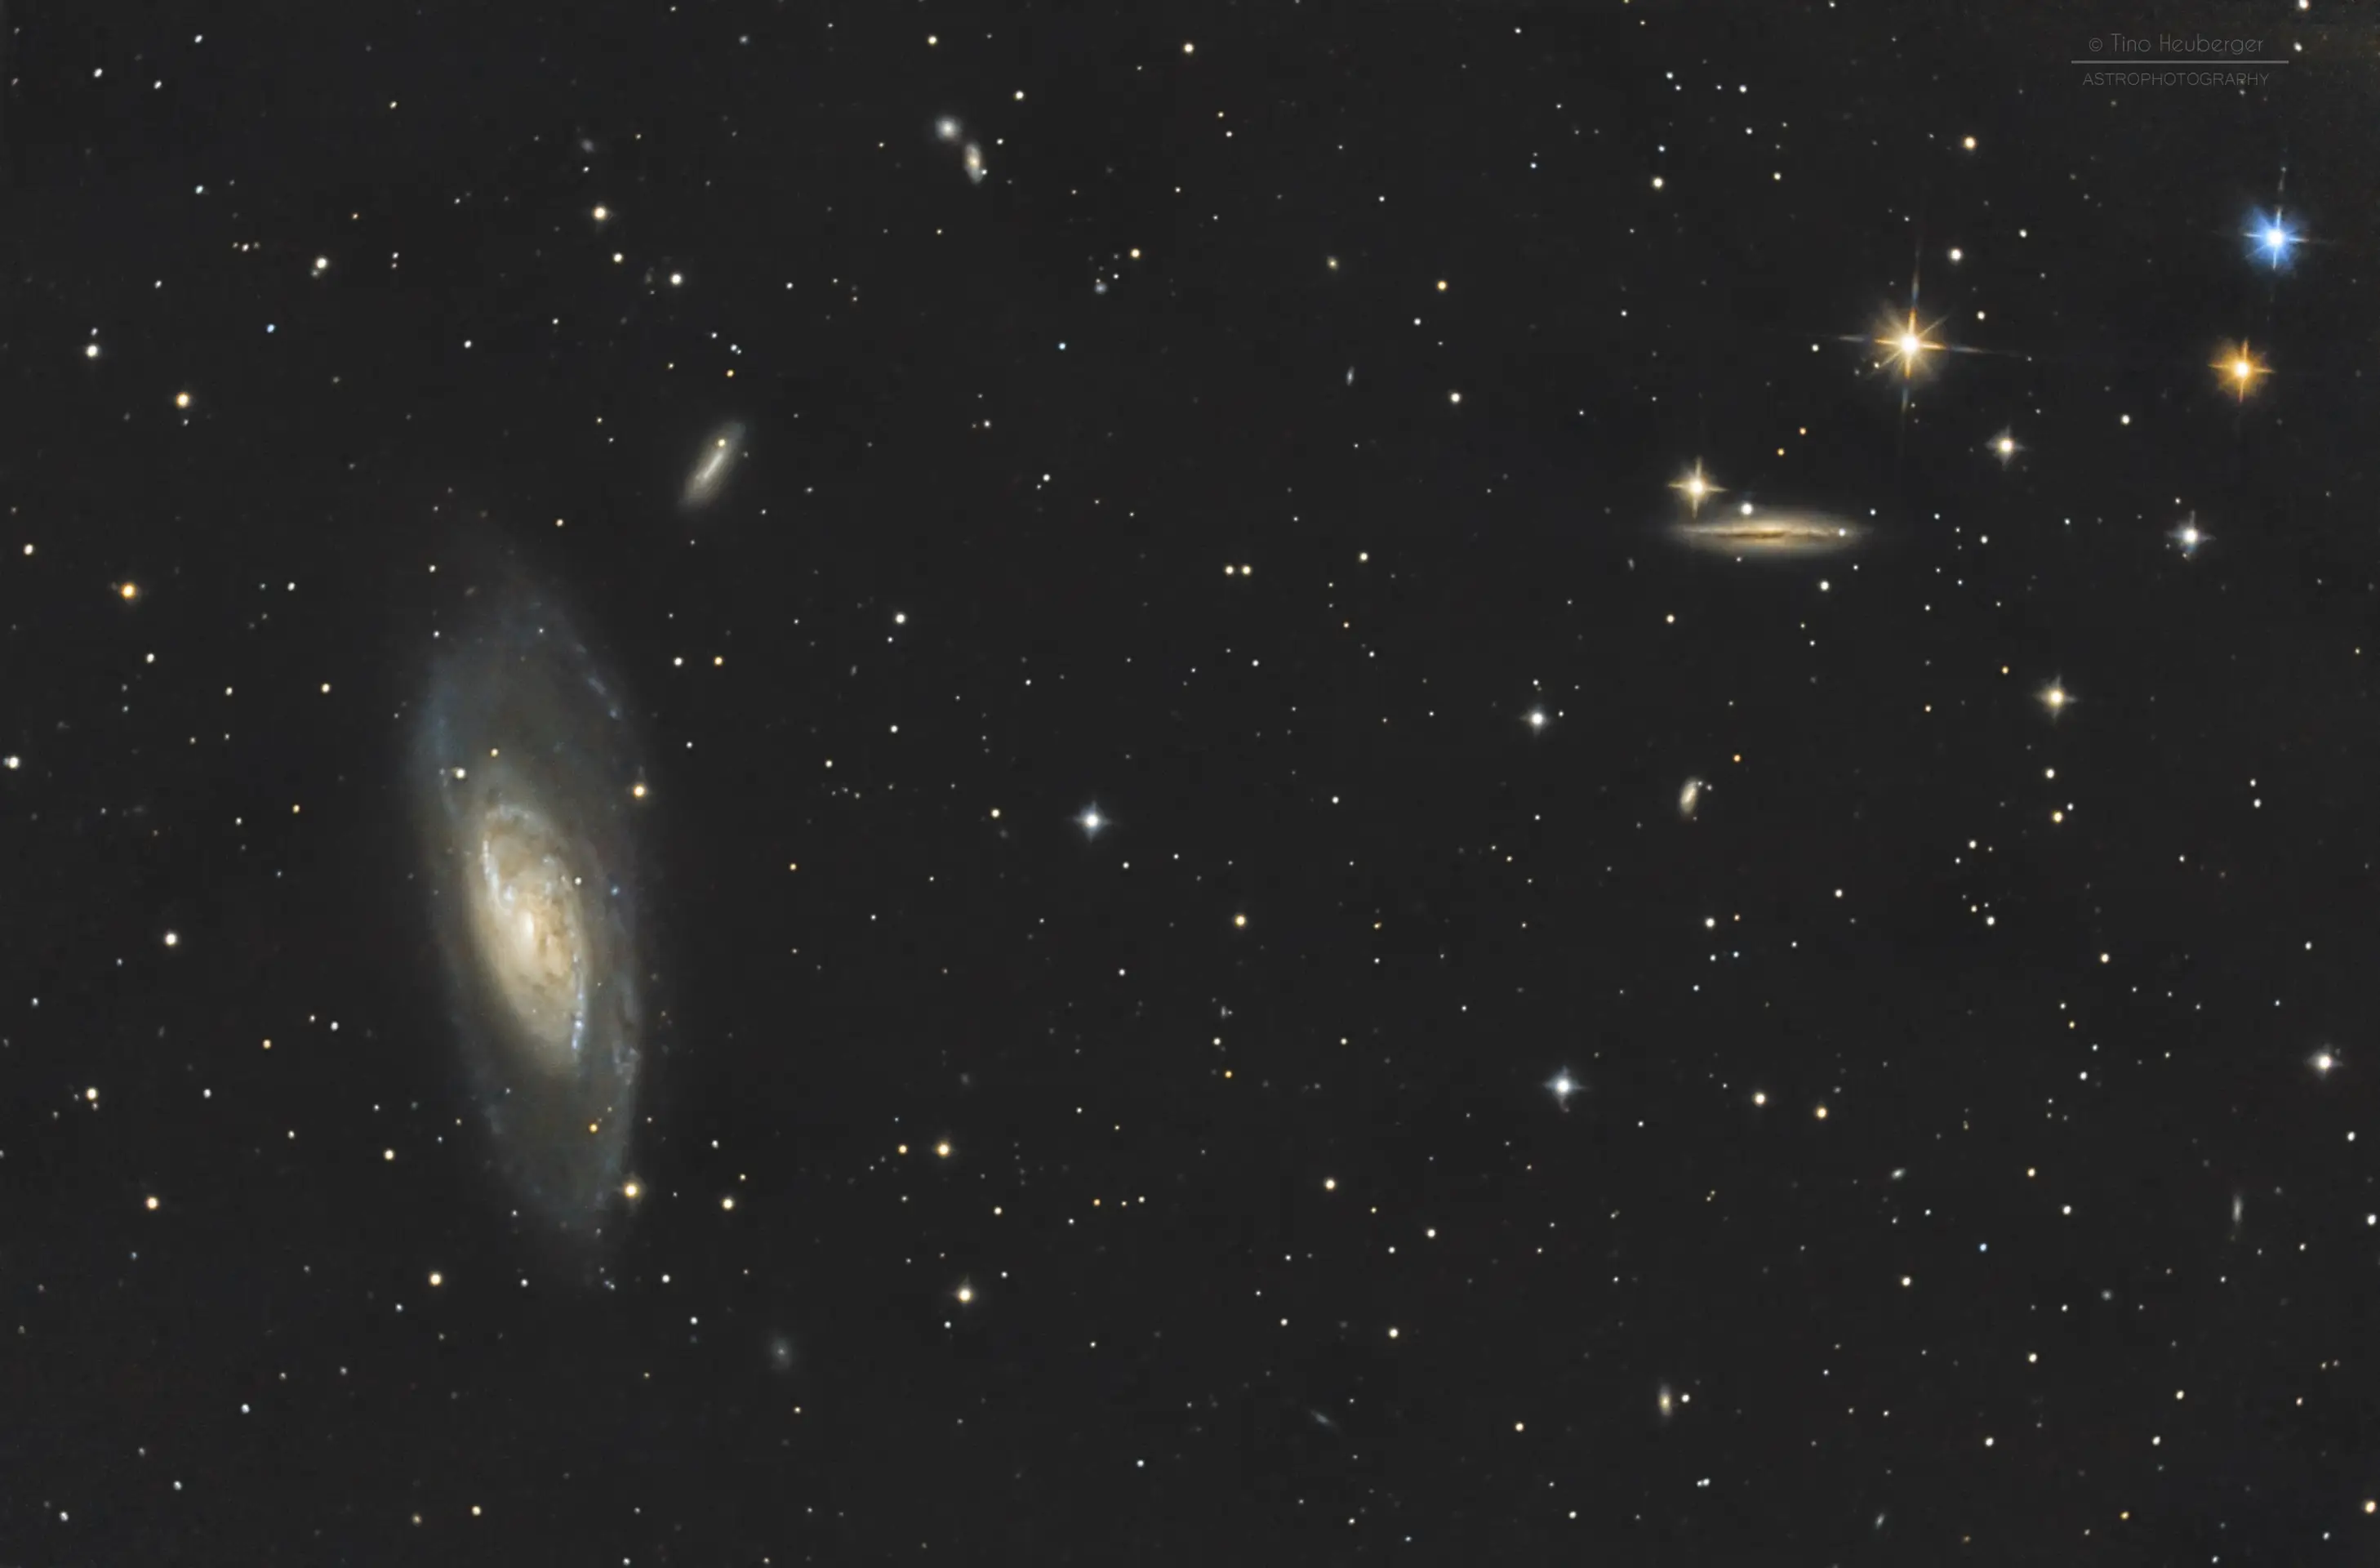 Messier 106 and its friends